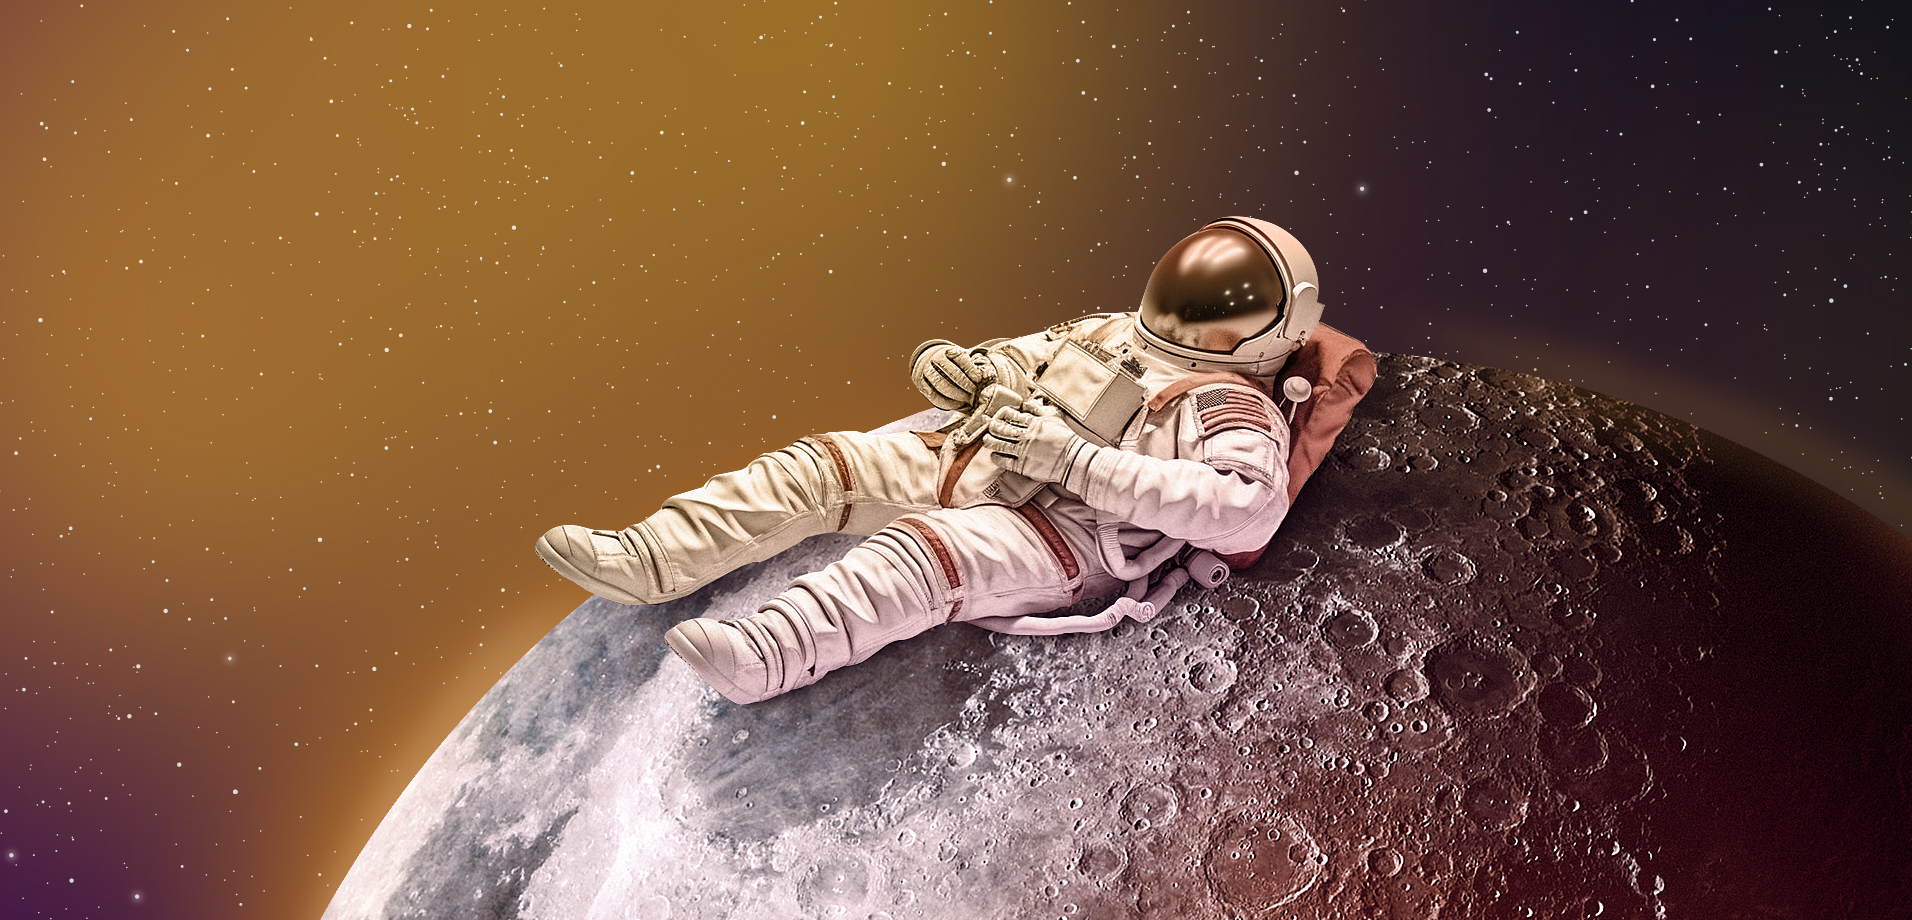 Sleeping in space: did you know?